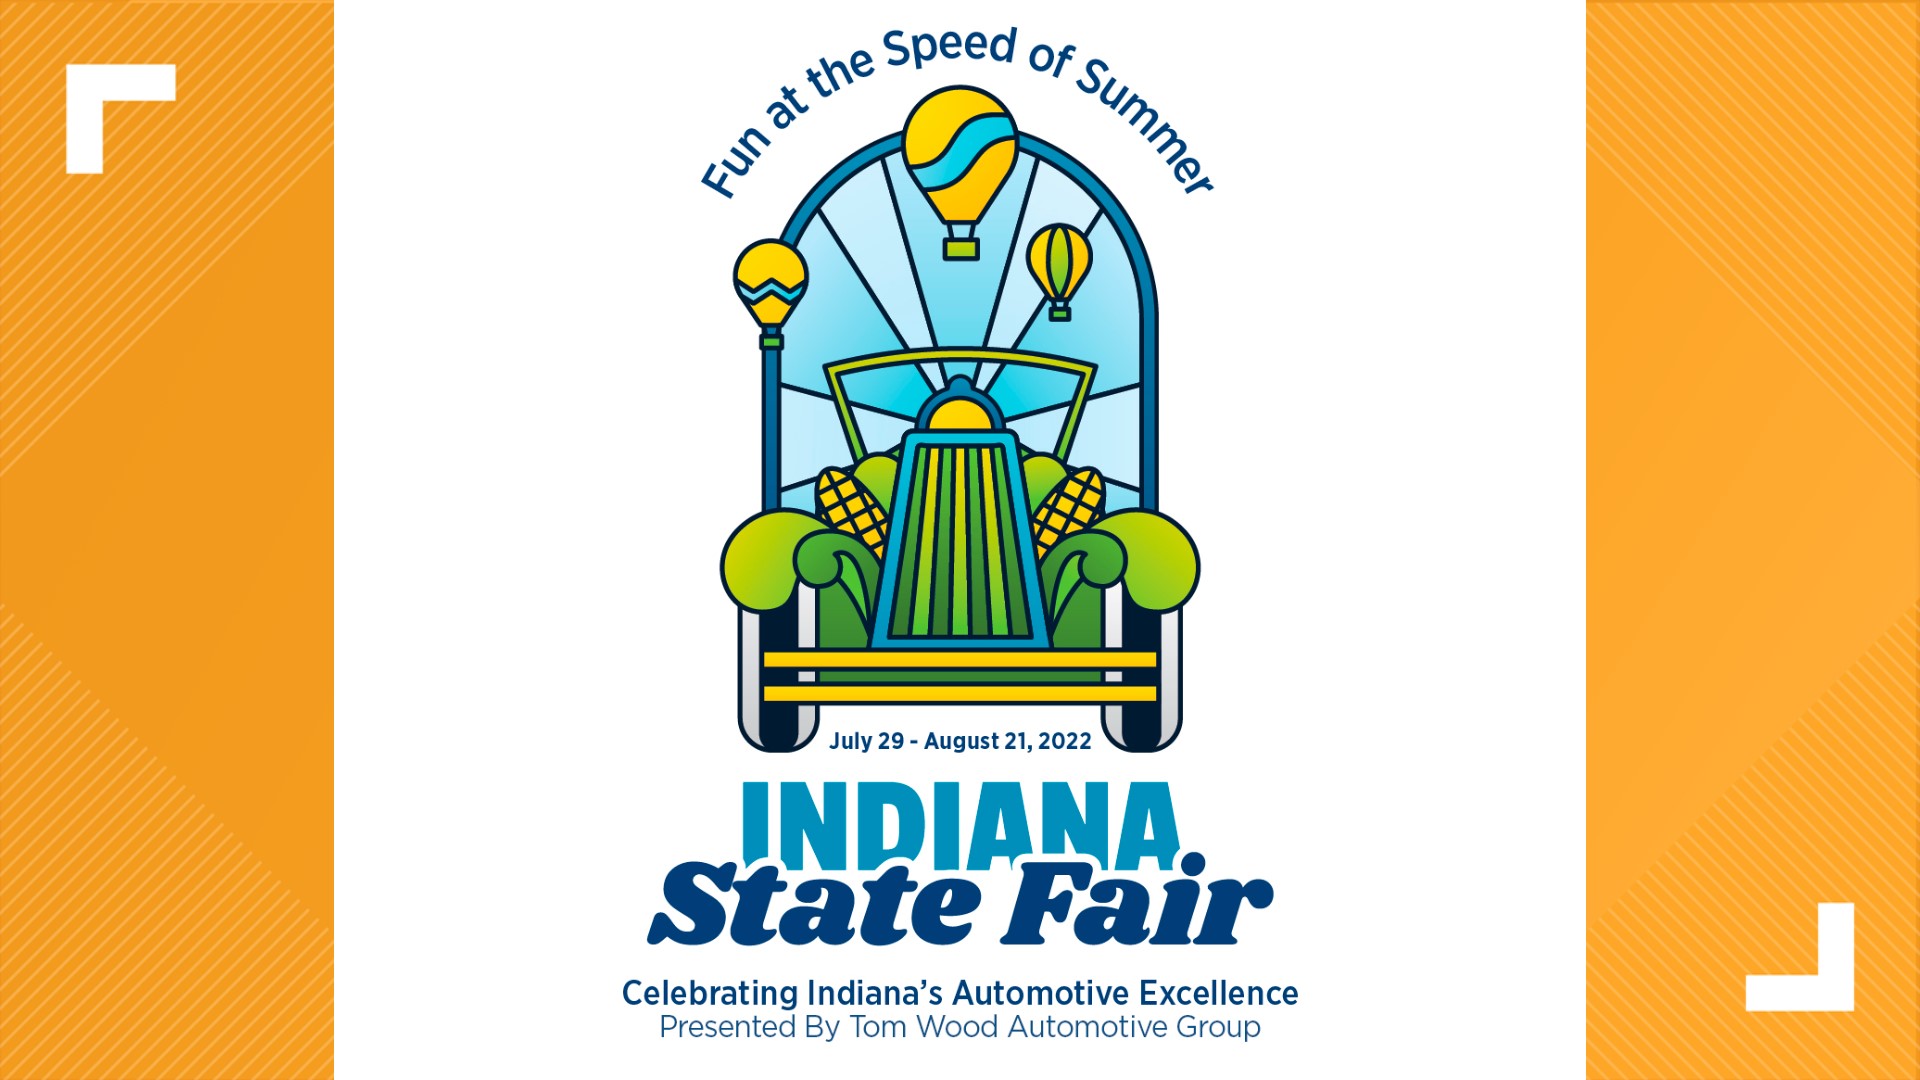 Fairgoers can expect to see iconic, celebrity cars from movies and books, in addition to classic car collections showcasing Indiana-made vehicles.